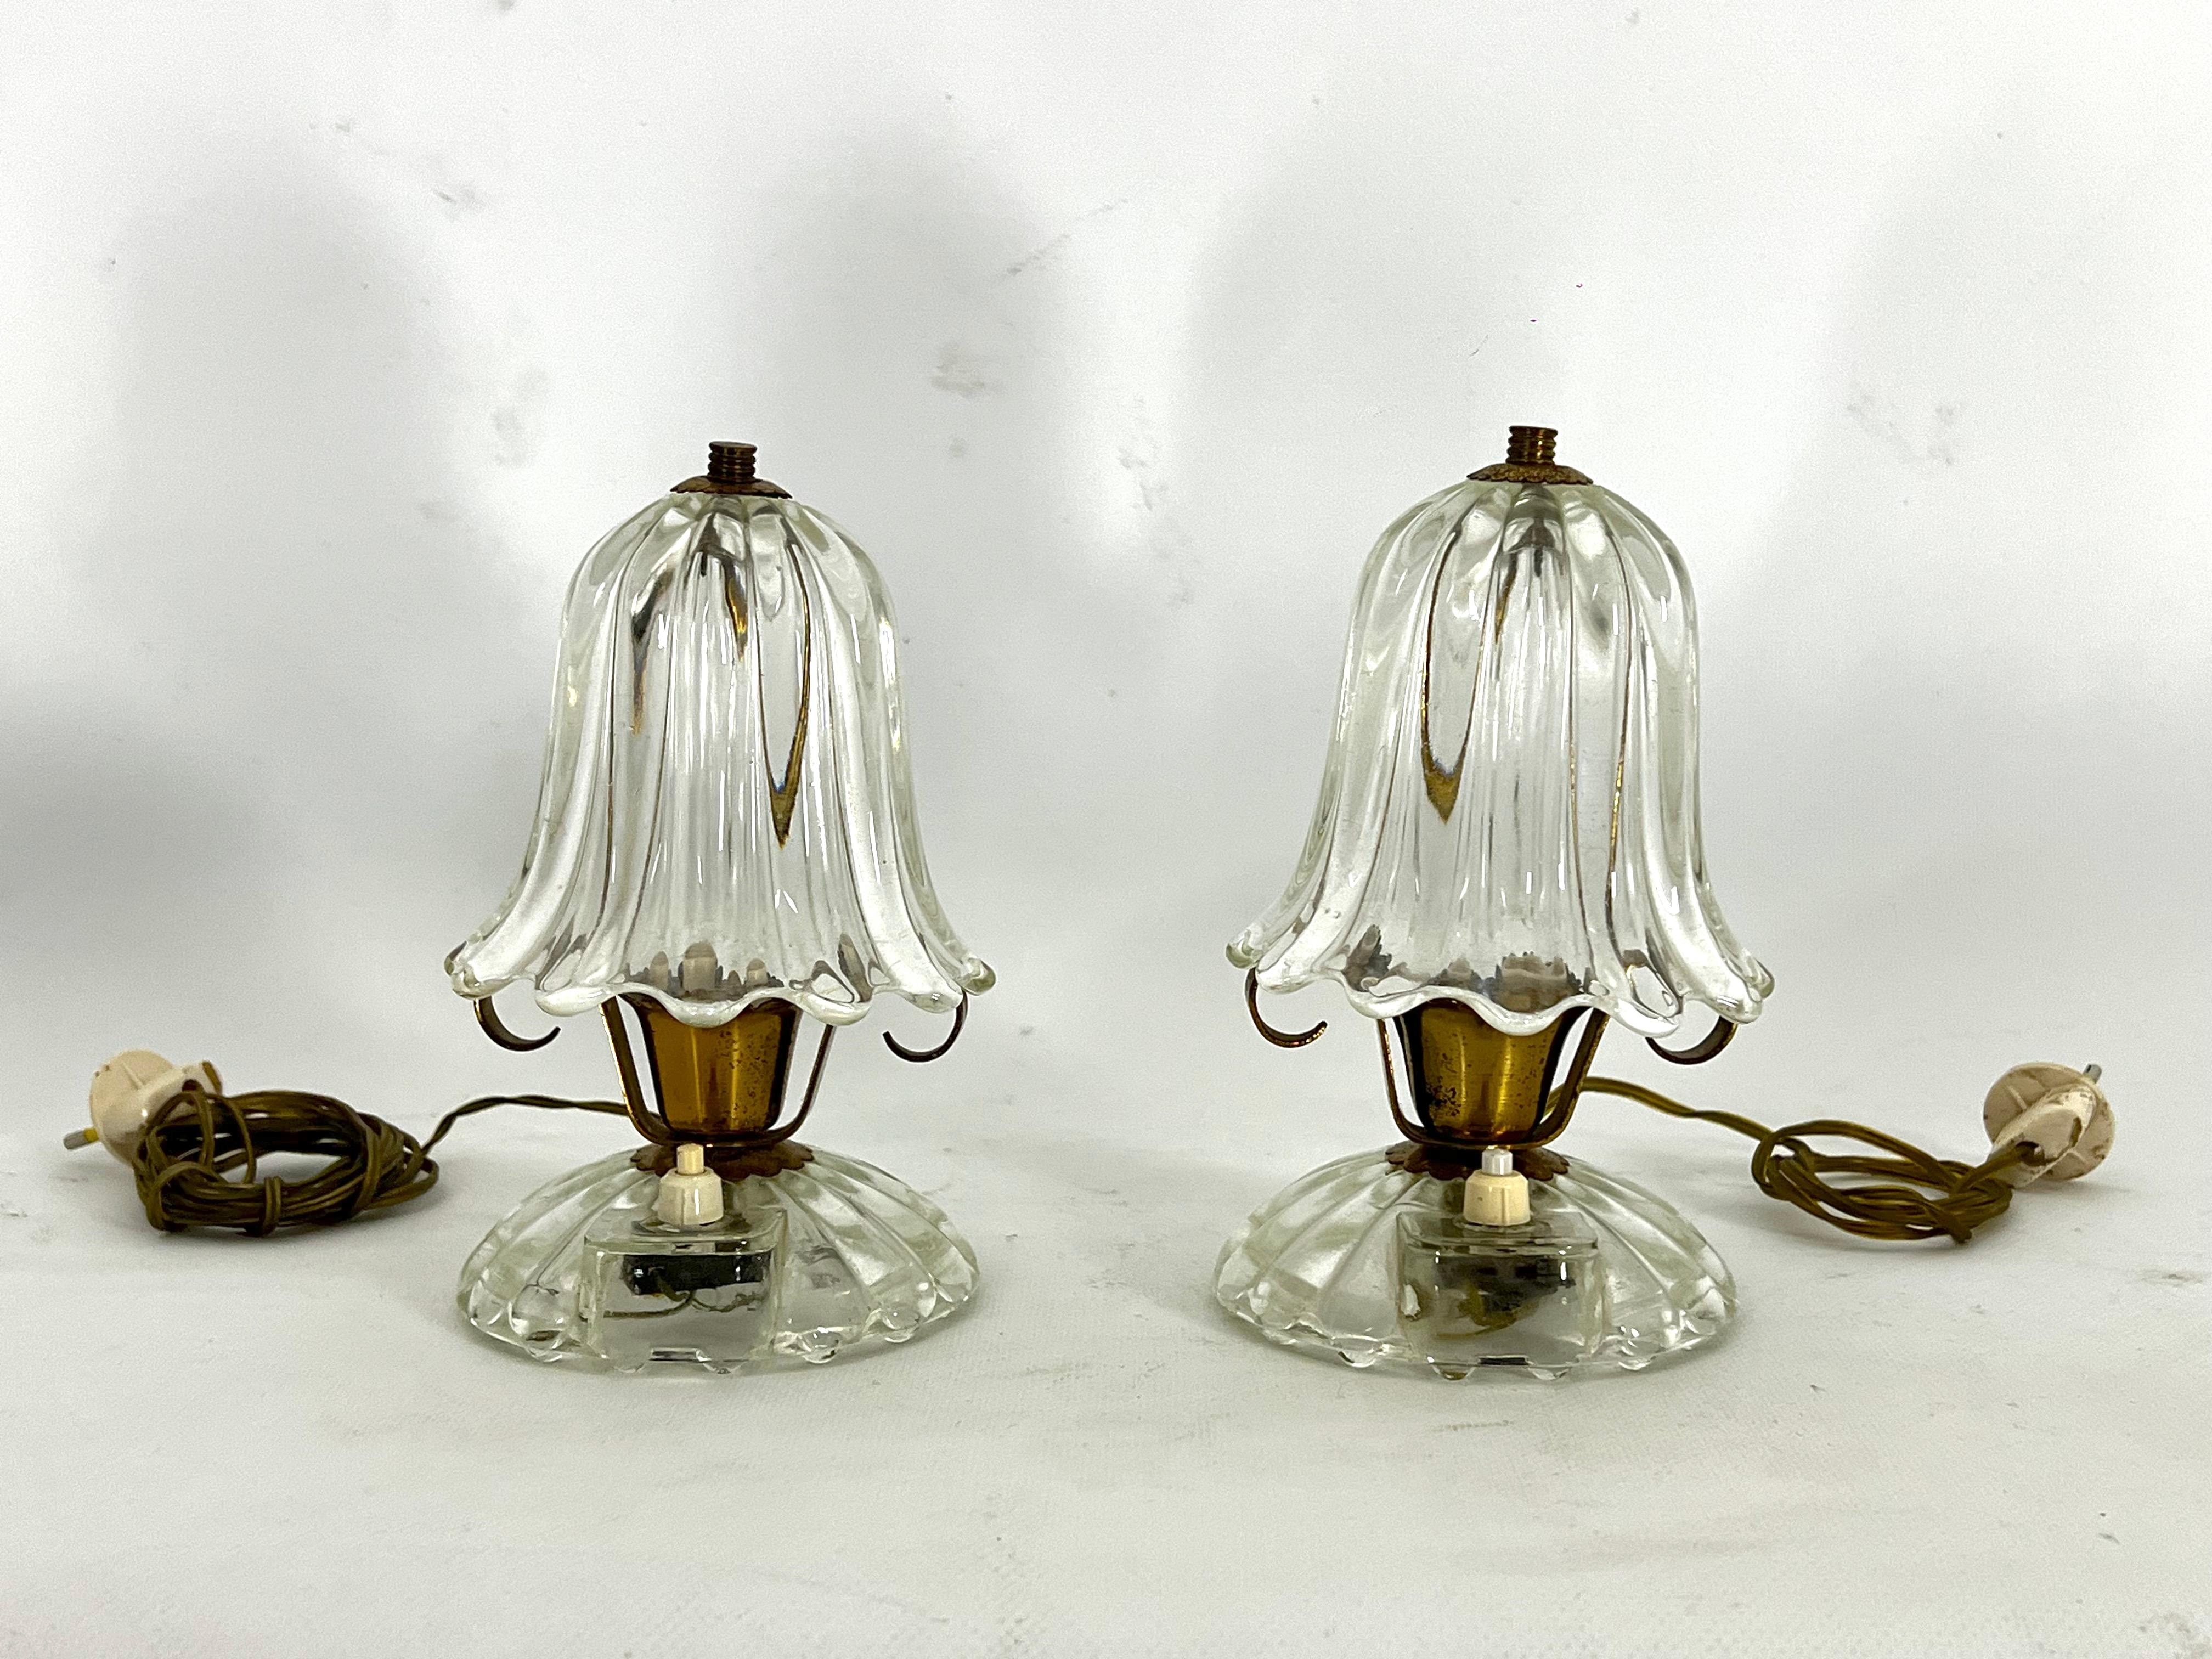 Set of two small table lamps designed by Ercole Barovier during the 40s.
Good vintage condition with normal trace of age and use but a crack on a brass socket as shown in pictures. Glasses with no defects. Full working with EU standard, adaptable on